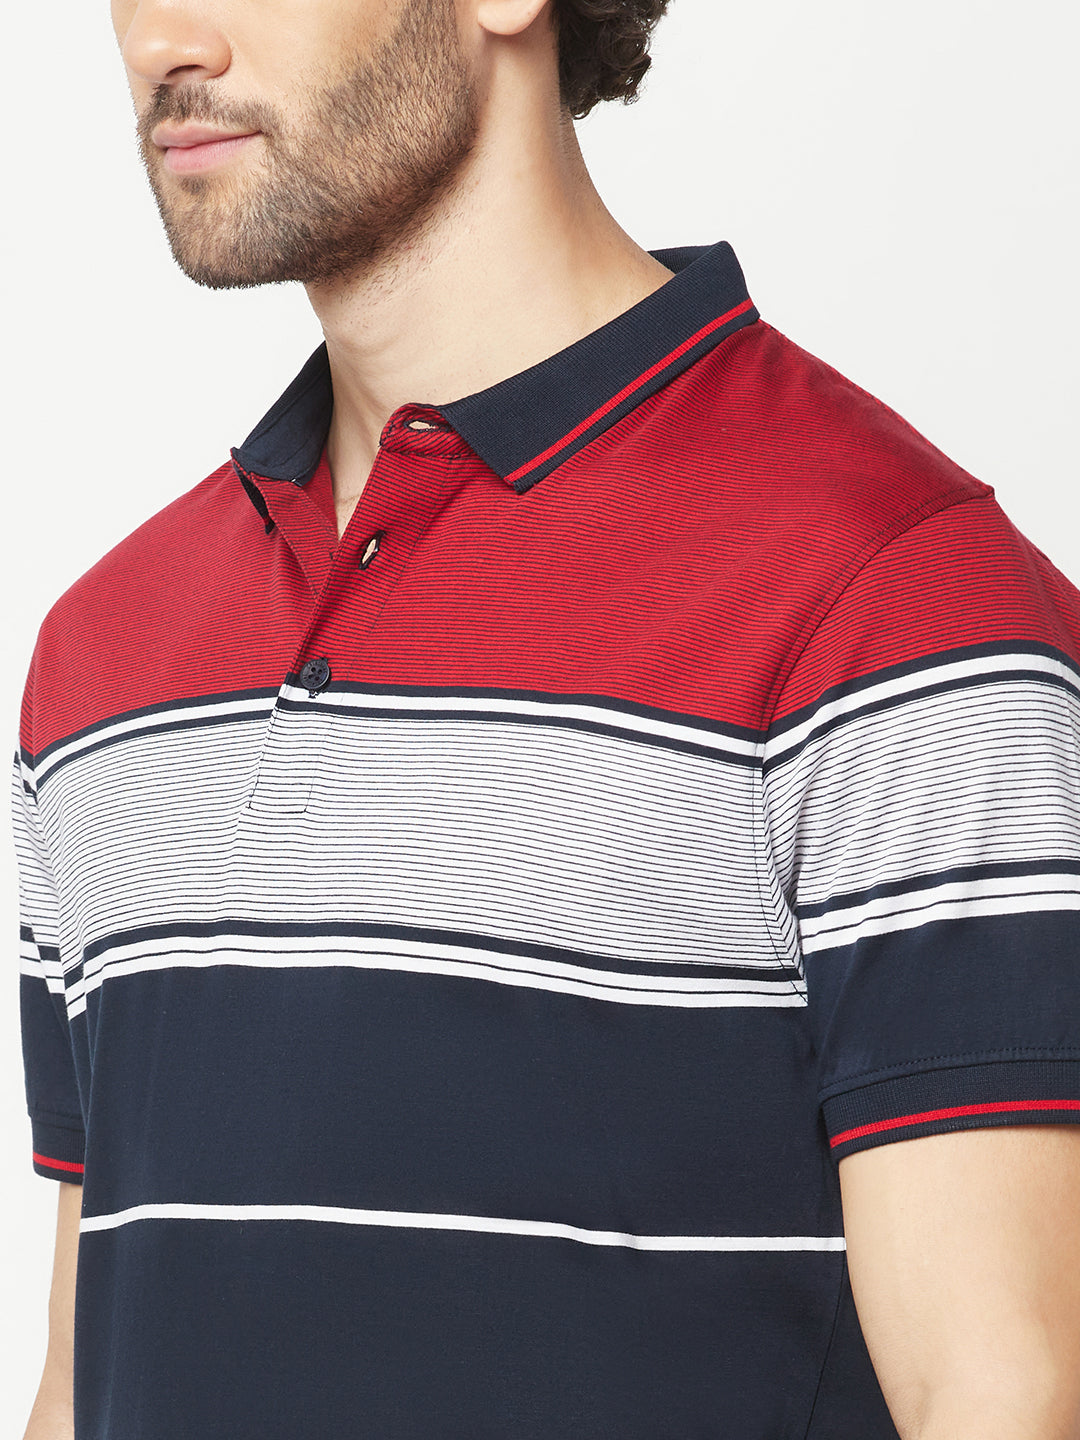 Striped Red Polo T-Shirt